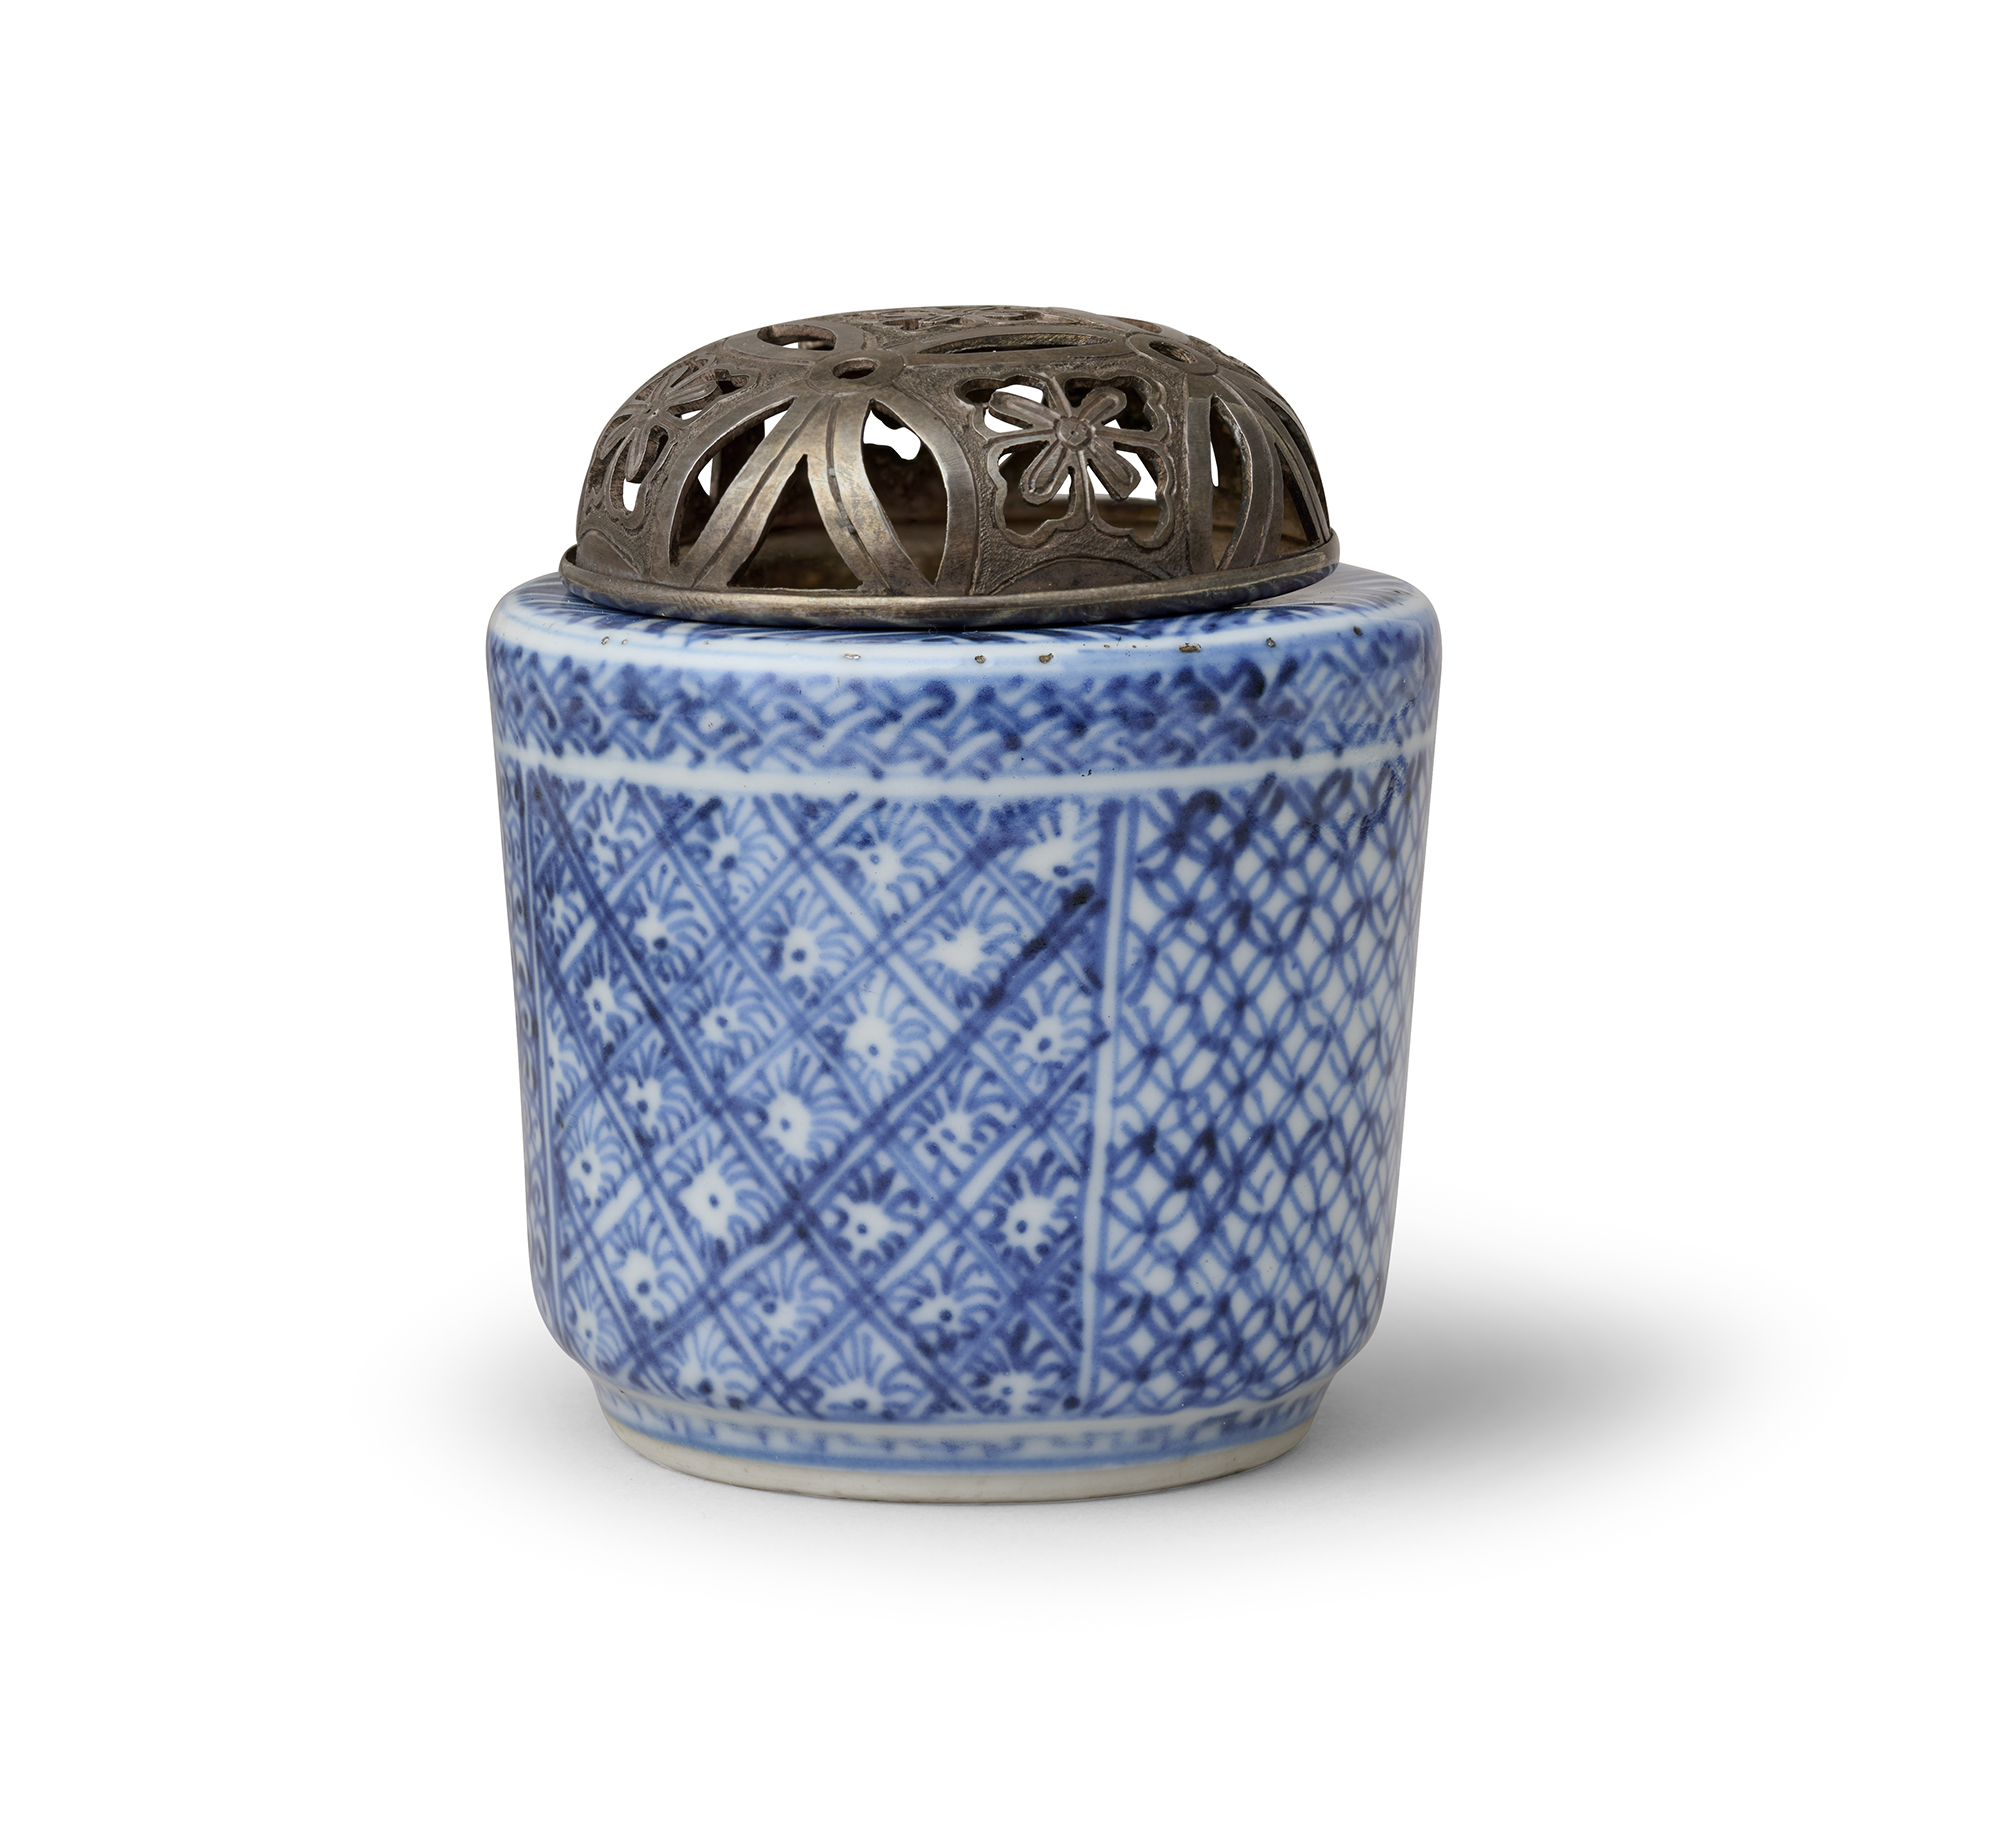 A CHINESE BLUE AND WHITE PORCELAIN INCENSE BURNER, KORO, TIANQI PERIOD, 1621 – 1627 - Image 2 of 10